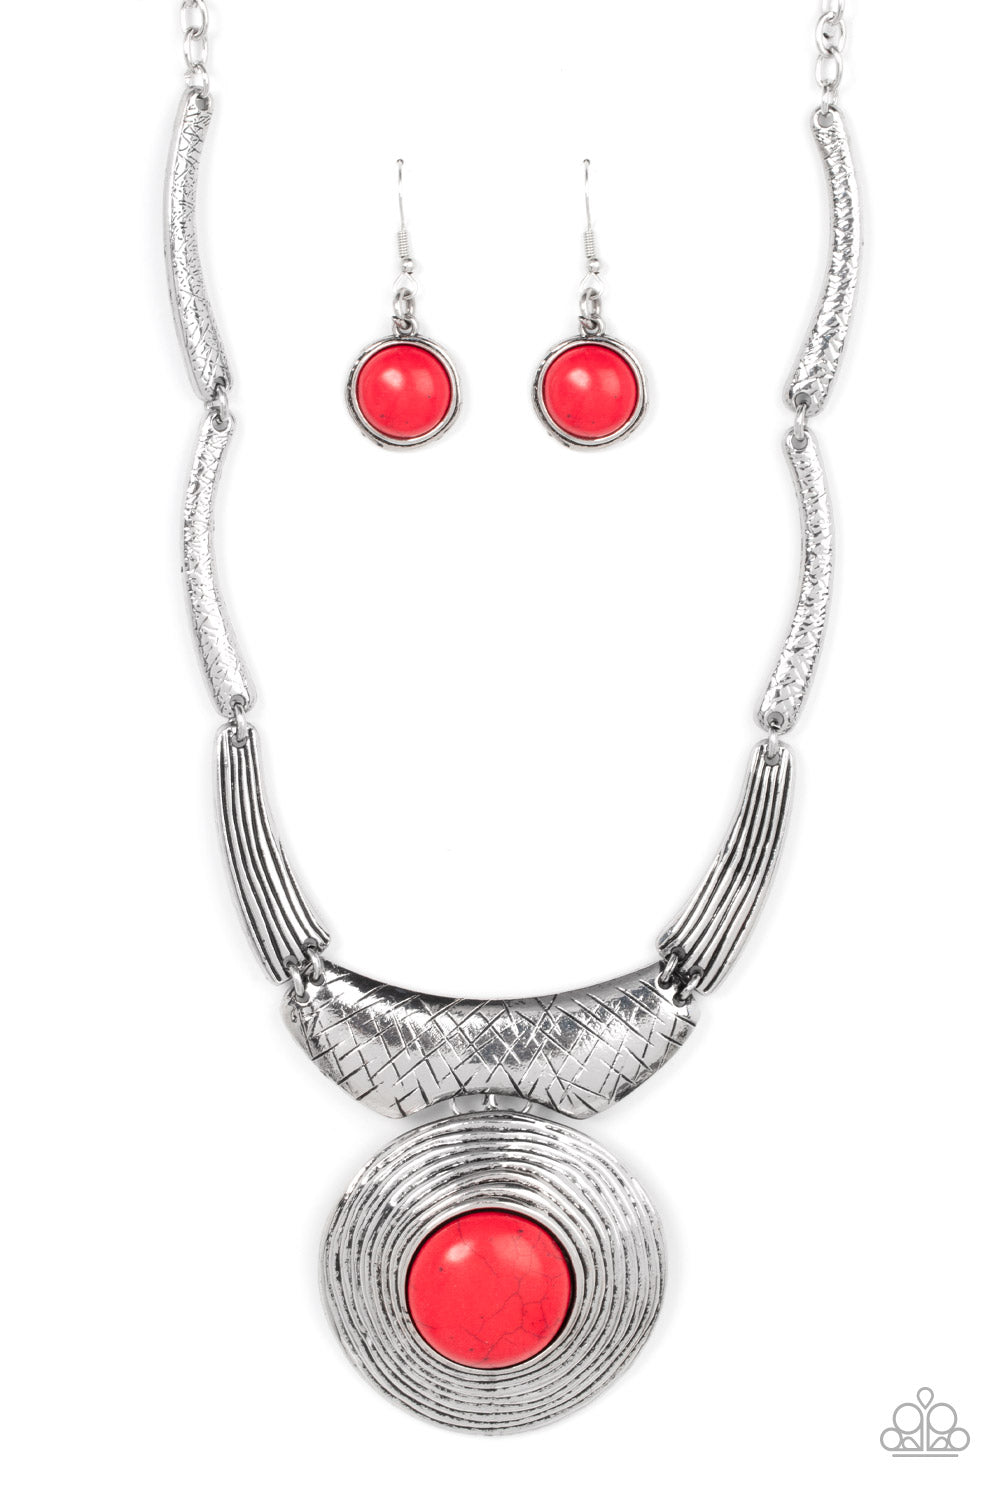 EMPRESS-ive Resume - Red Necklace - Paparazzi Accessories 